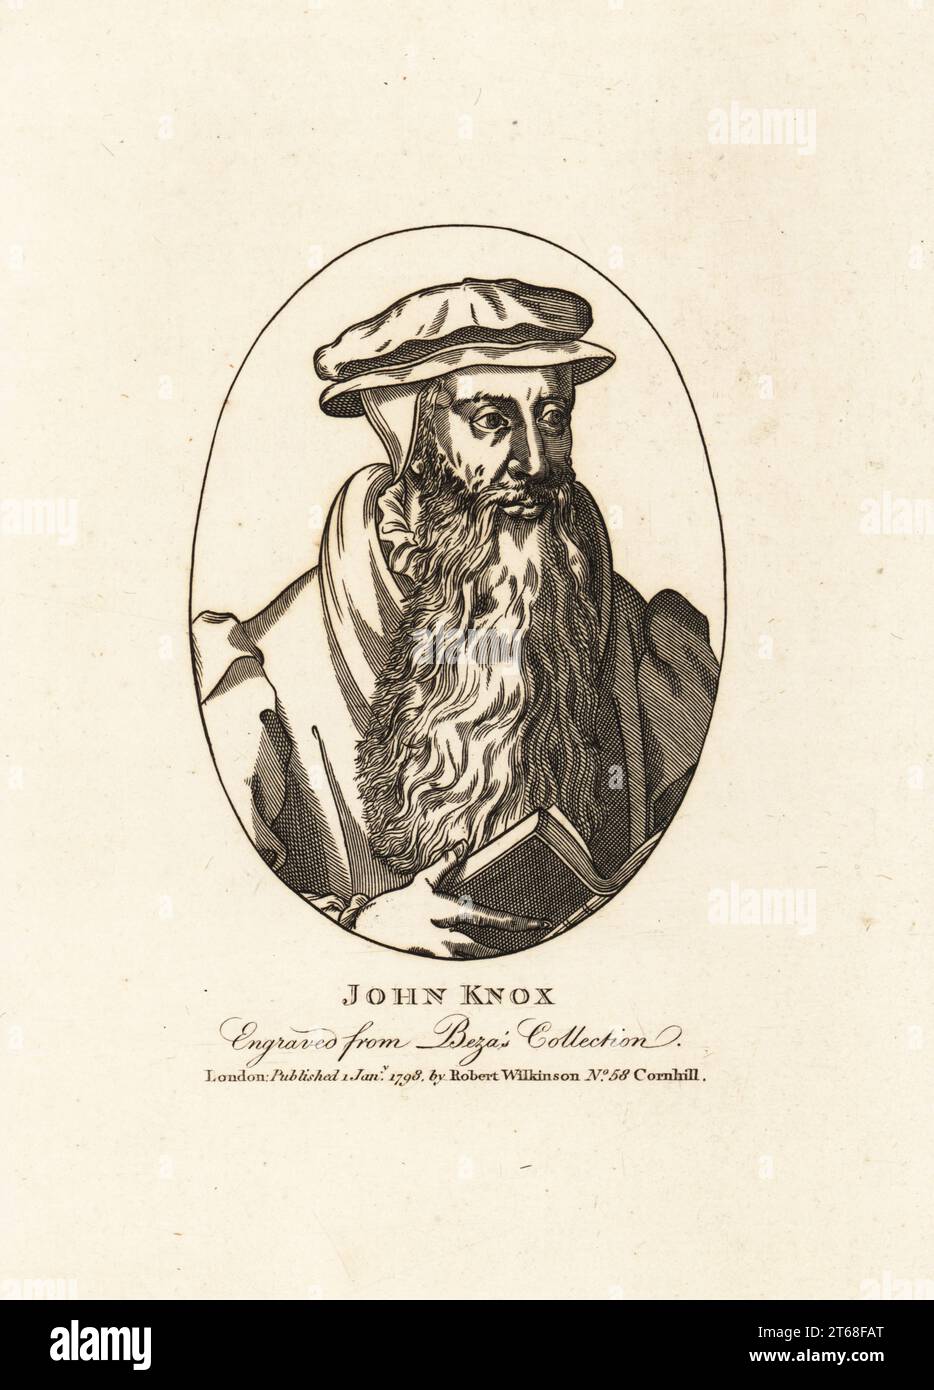 John Knox (1505-1572), Scottish priest, leader of the Protestant Reformation in Scotland. With long beard, cap, hood and coat, holding a Bible. Engraved from Theodore Beza's collection. Copperplate engraving from John Smiths Iconographia Scotica, or portraits of illustrious persons of Scotland, Robert Wilkinson, 58 Cornhill, London, 1798. Stock Photo